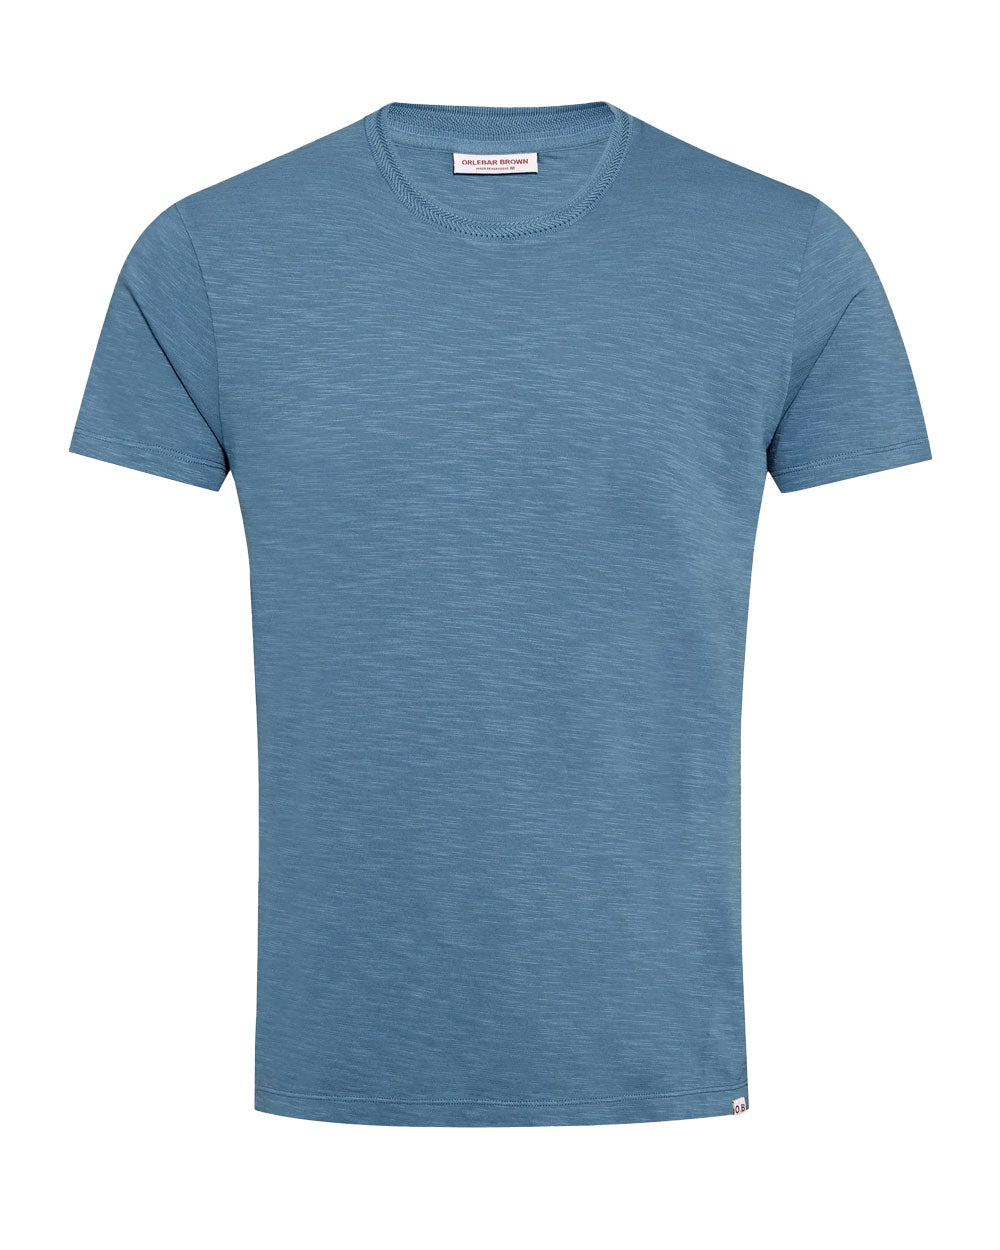 Classic Fit T-Shirt in Blue Smoke